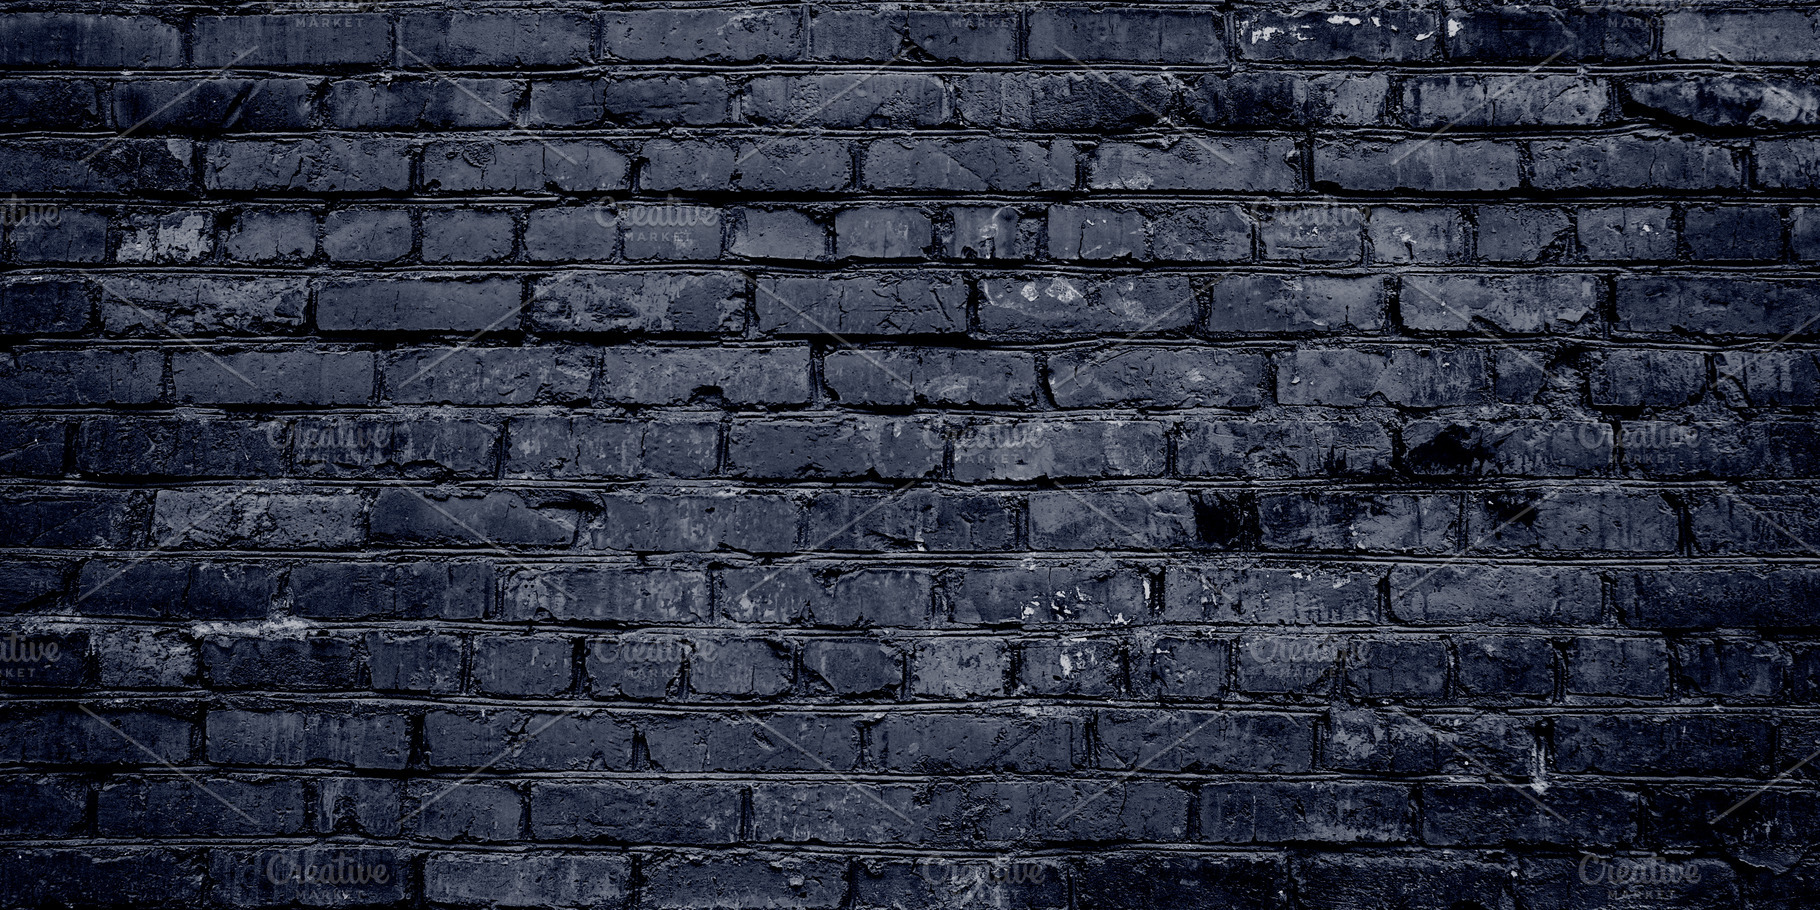 Black brick wall texture. Background | High-Quality Architecture Stock